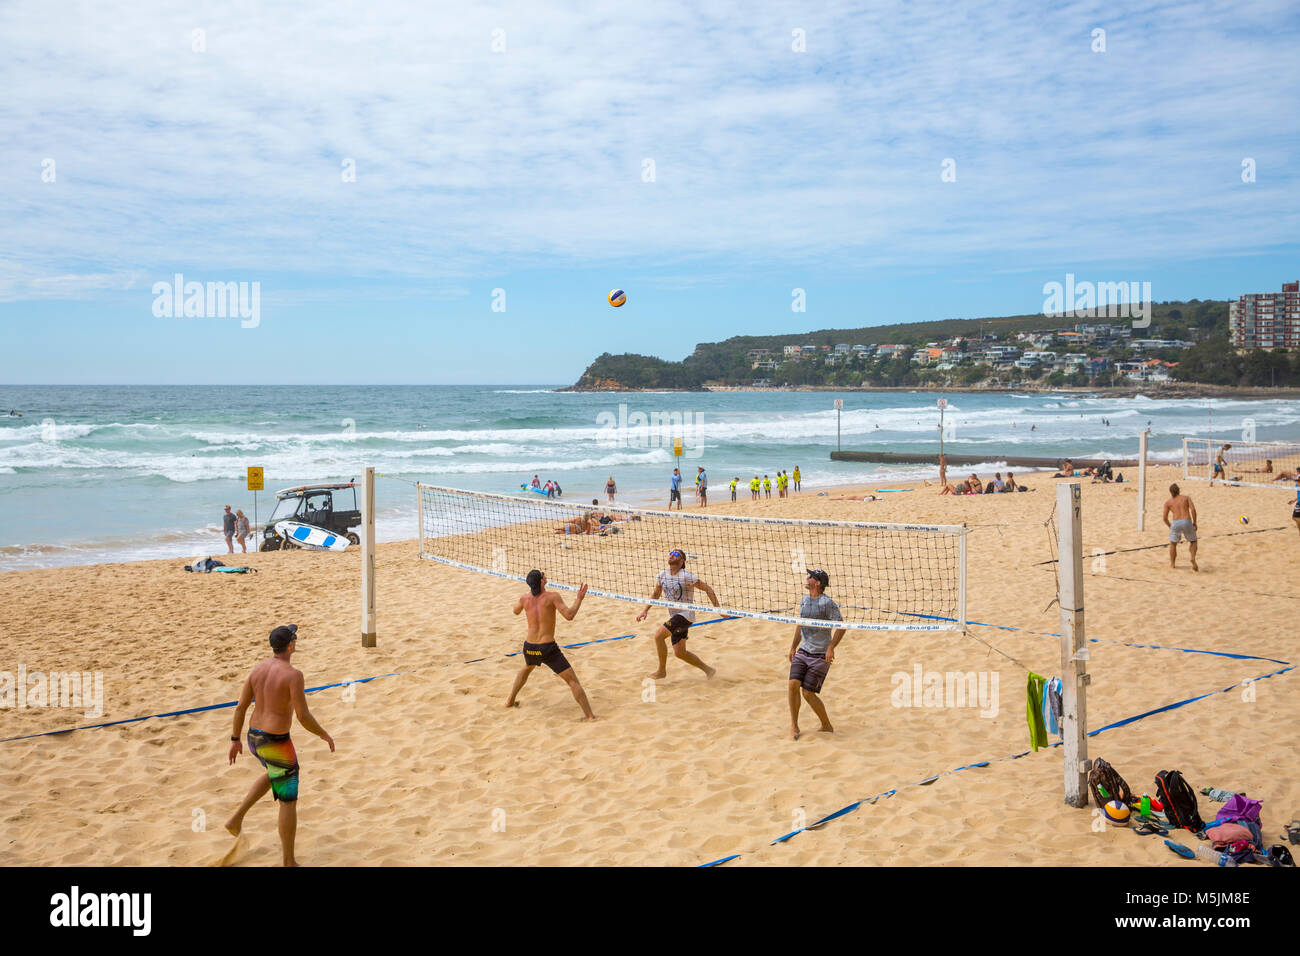 Teams playing beach volleyball on Manly beach in Sydney,Australia Stock Photo